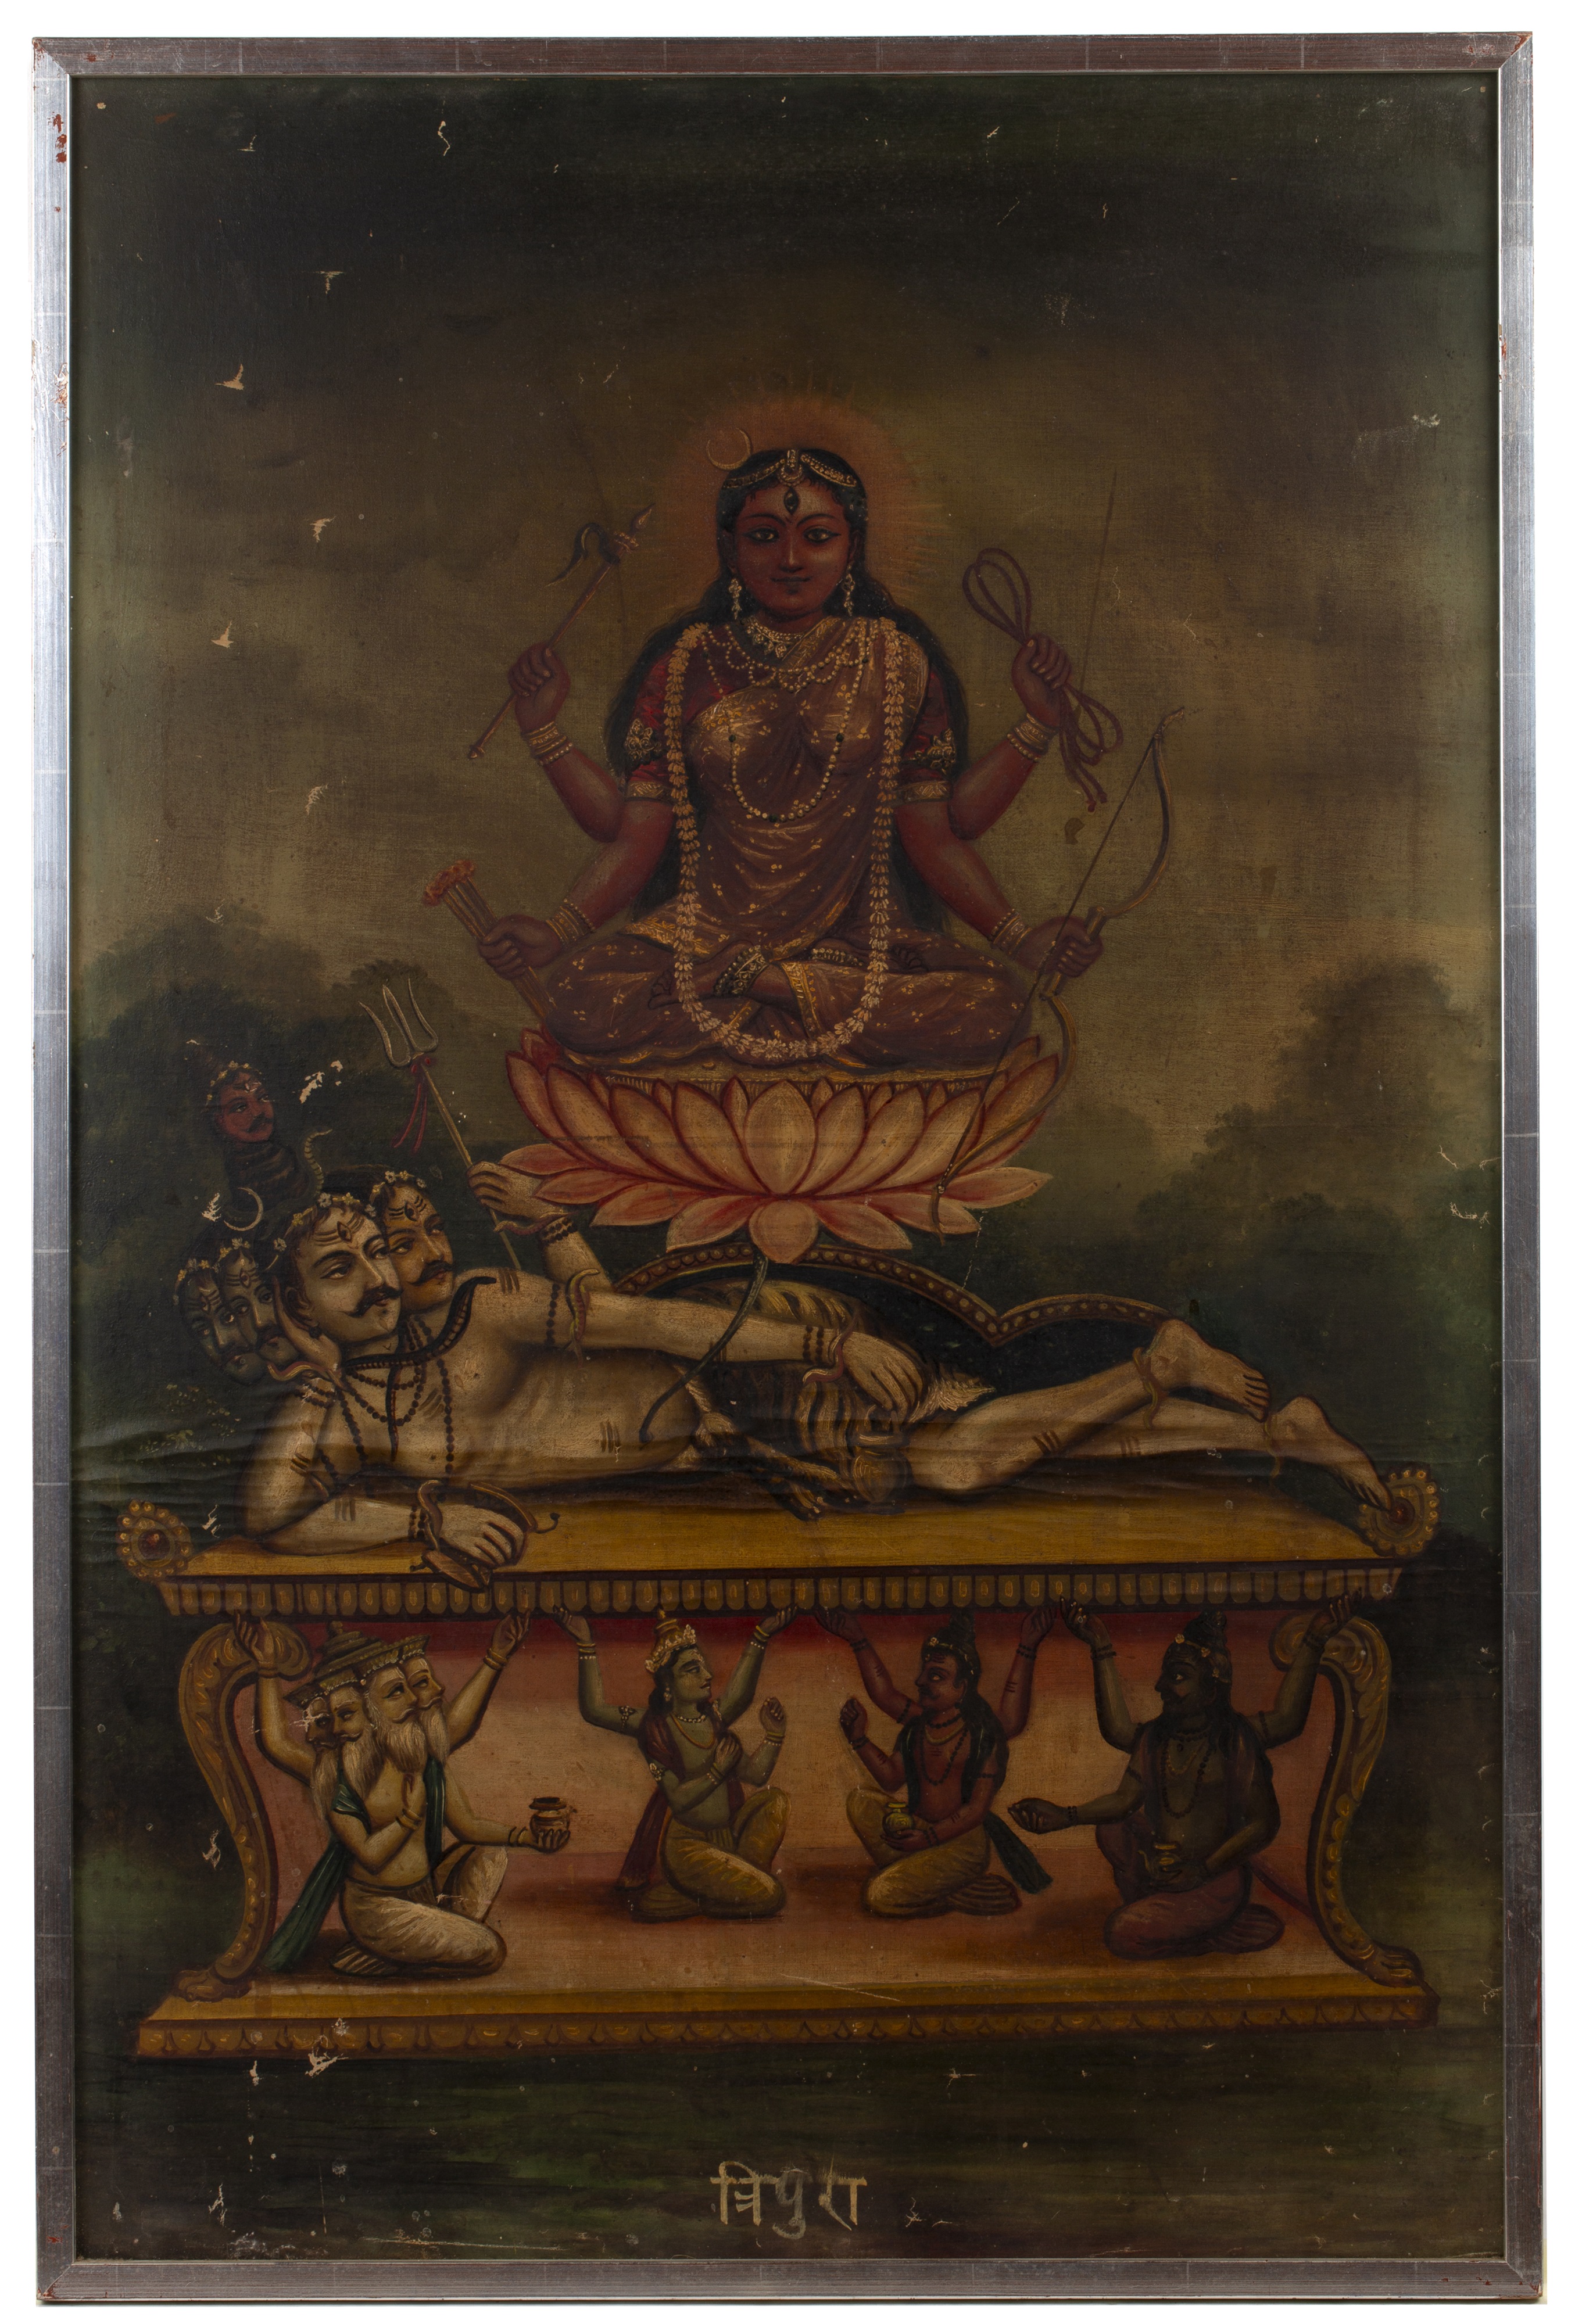 Bengal School Indian, 19th/ early 20th Century depiction of the Tantric Hindu goddess - Image 2 of 3